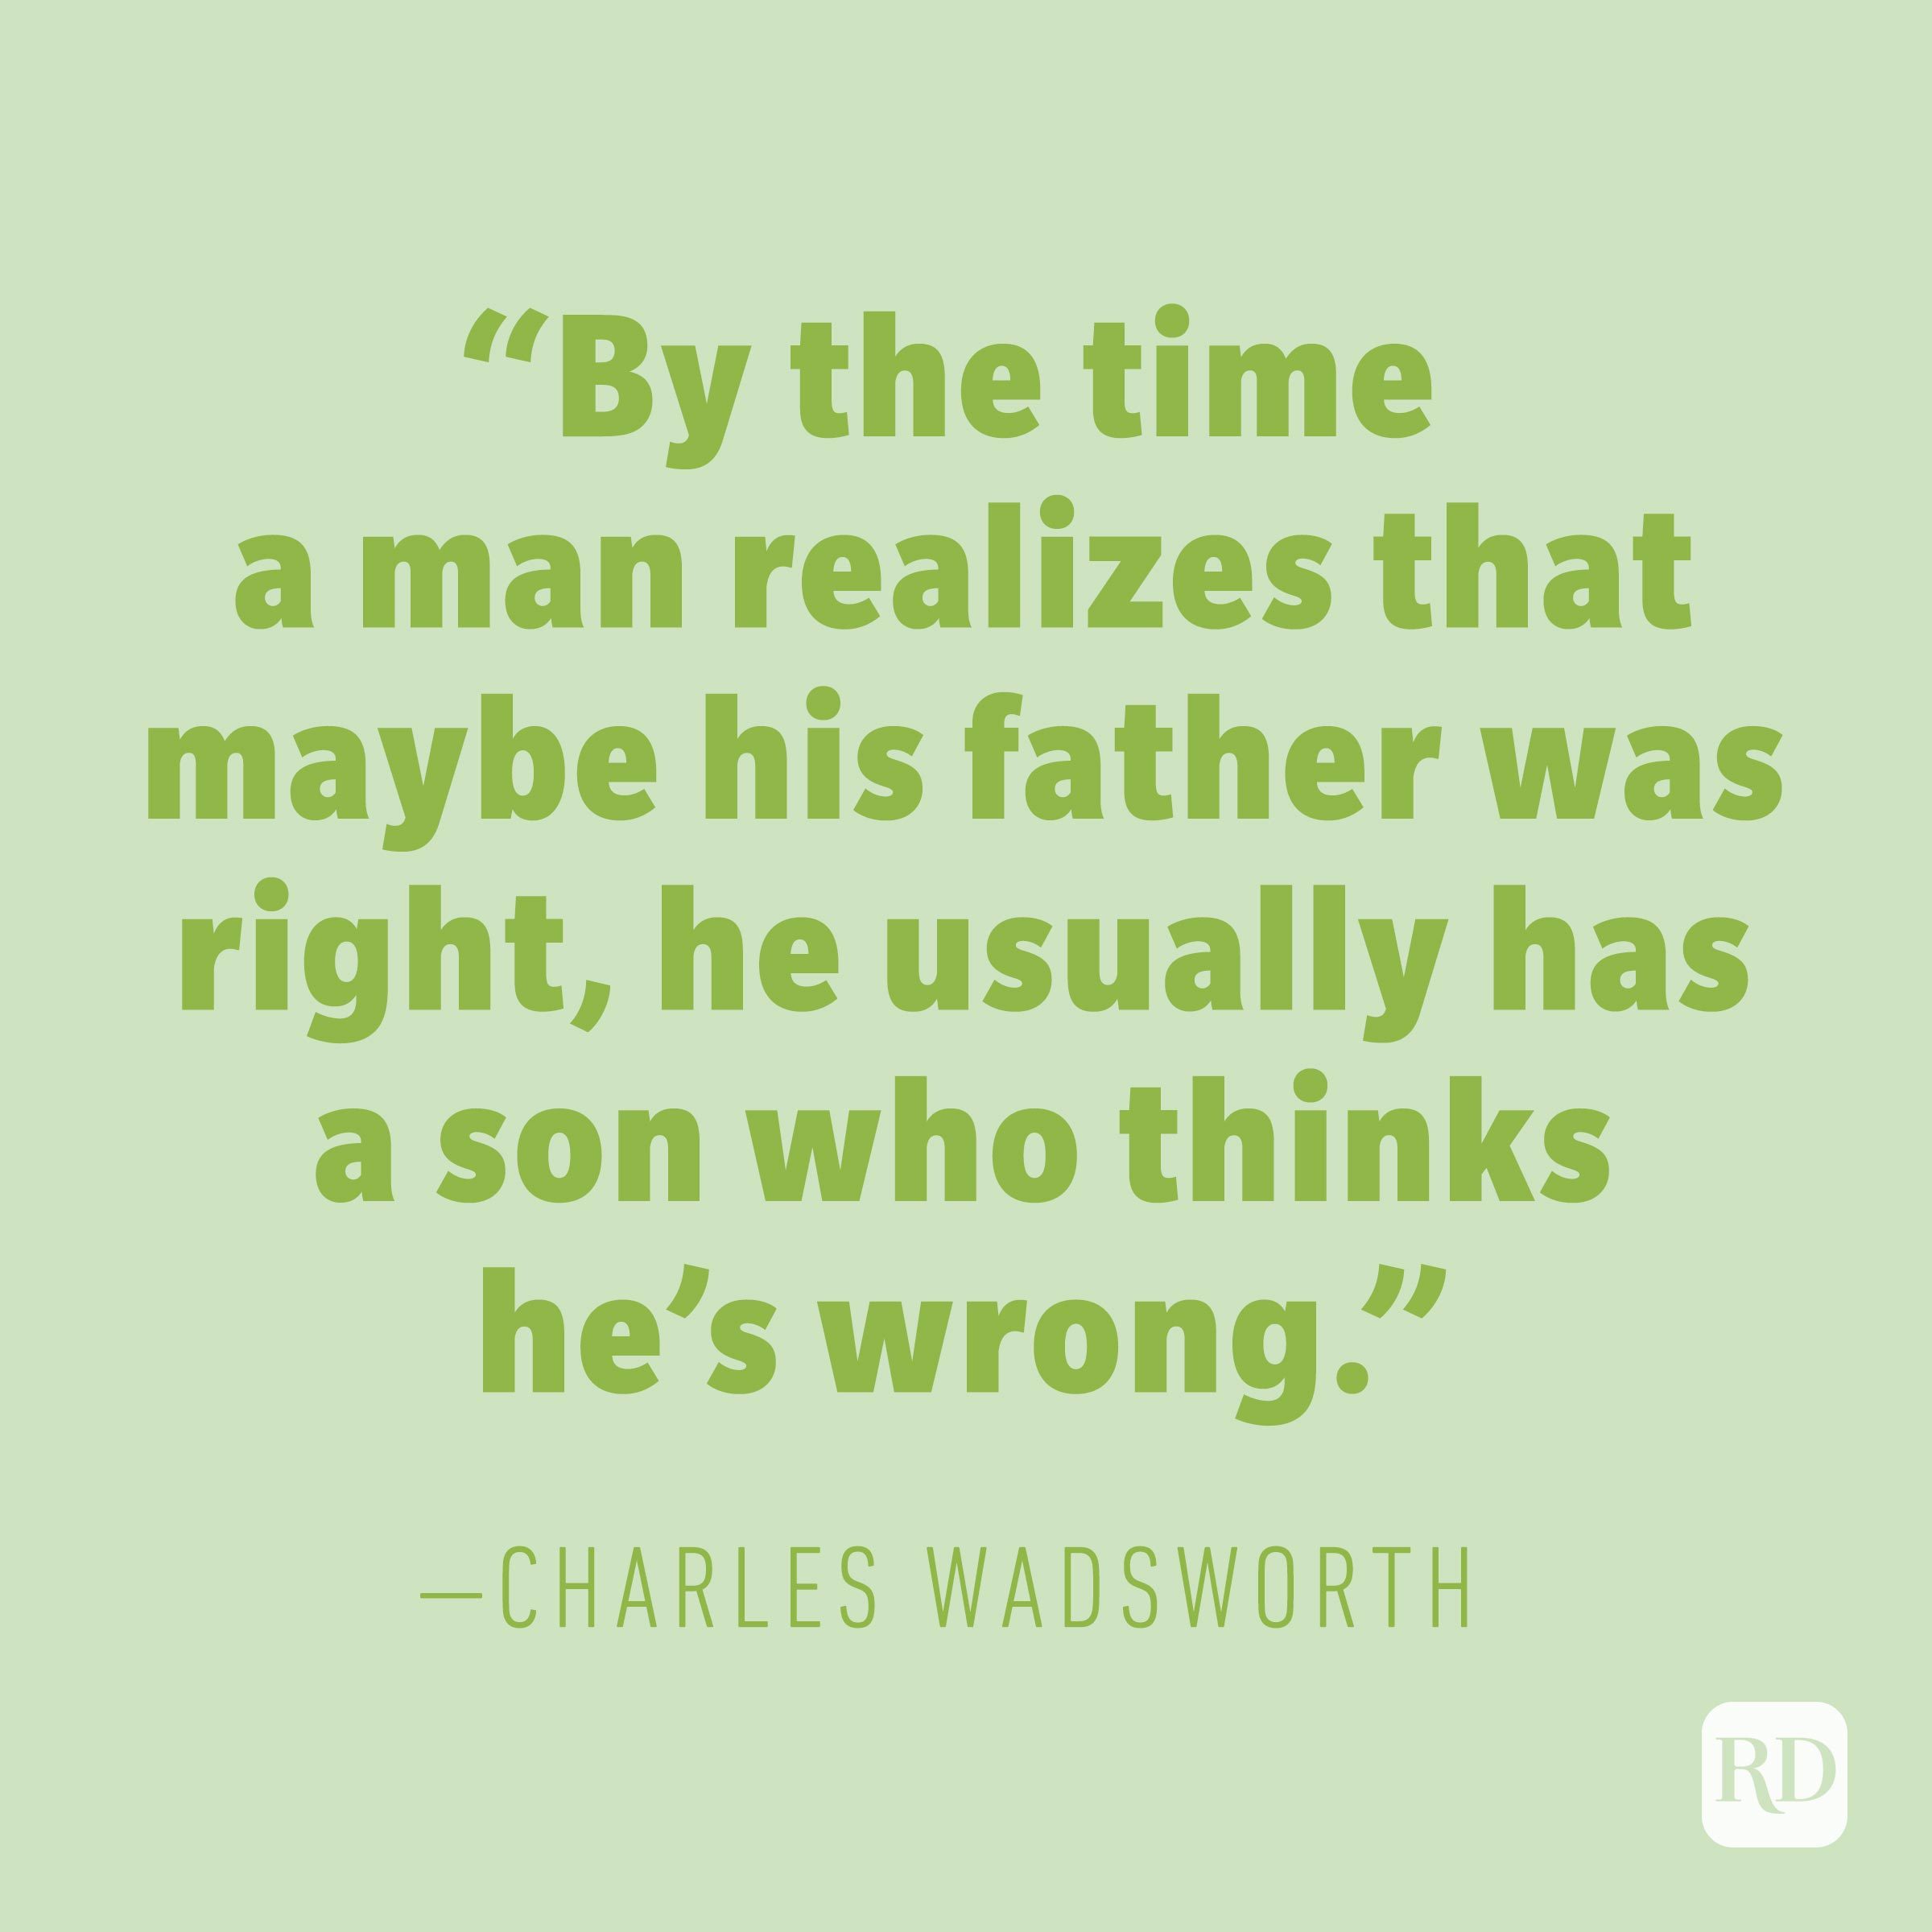 Charles Wadsworth quote